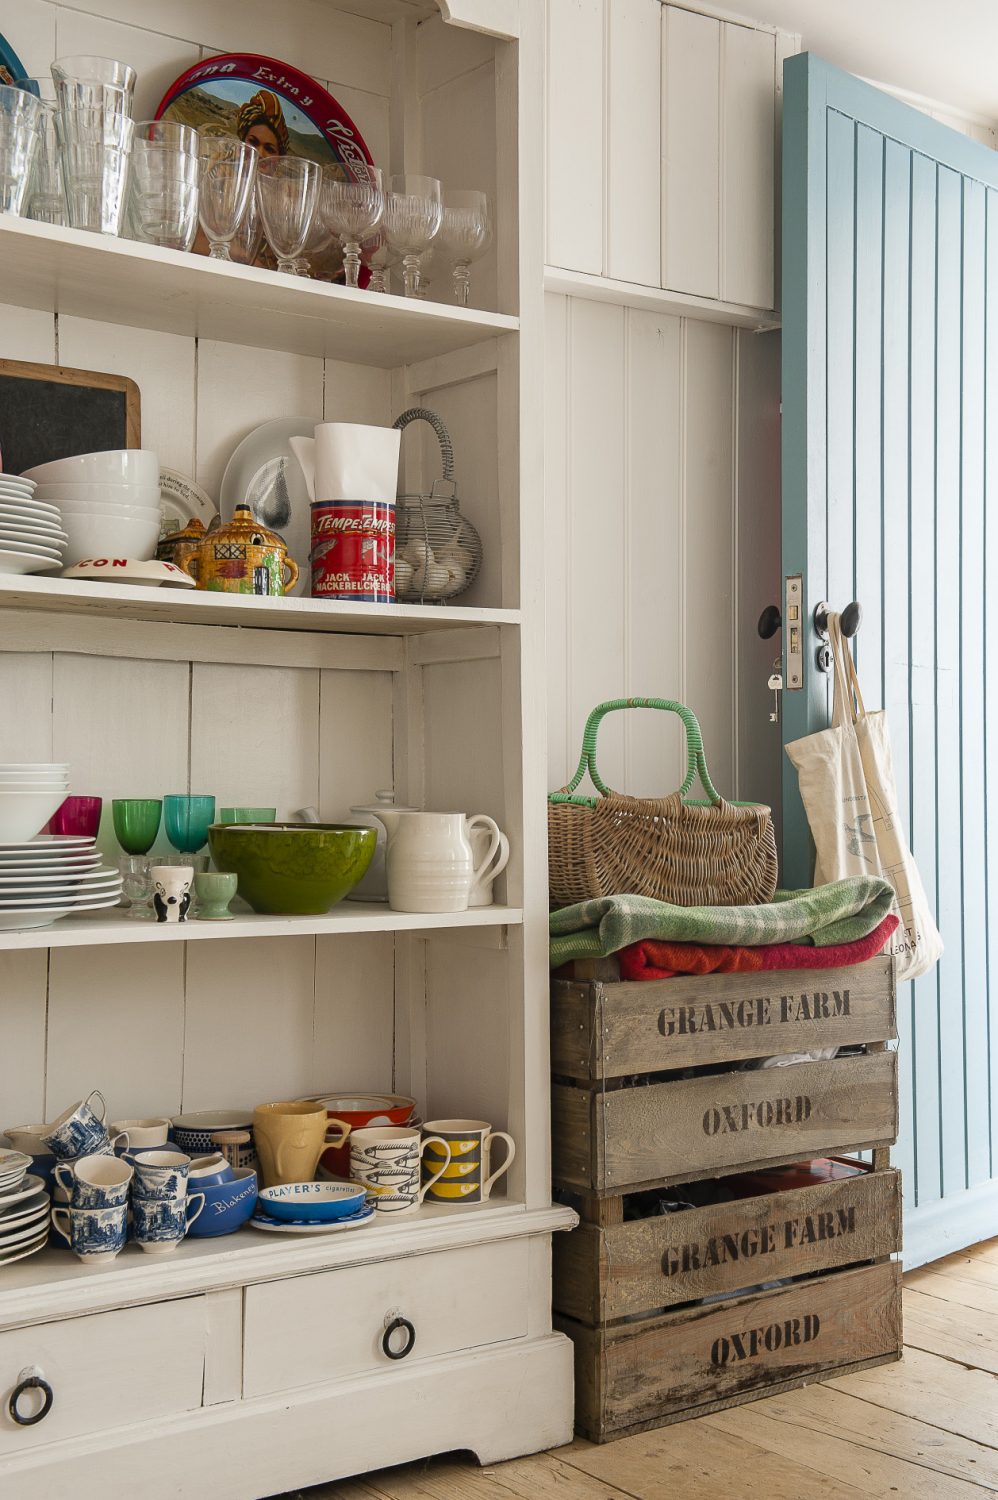 This includes the rack of wooden shelves by Garden Trading and everything in them: enamel bowls and jugs of various sizes, vintage cups and saucers and cook books